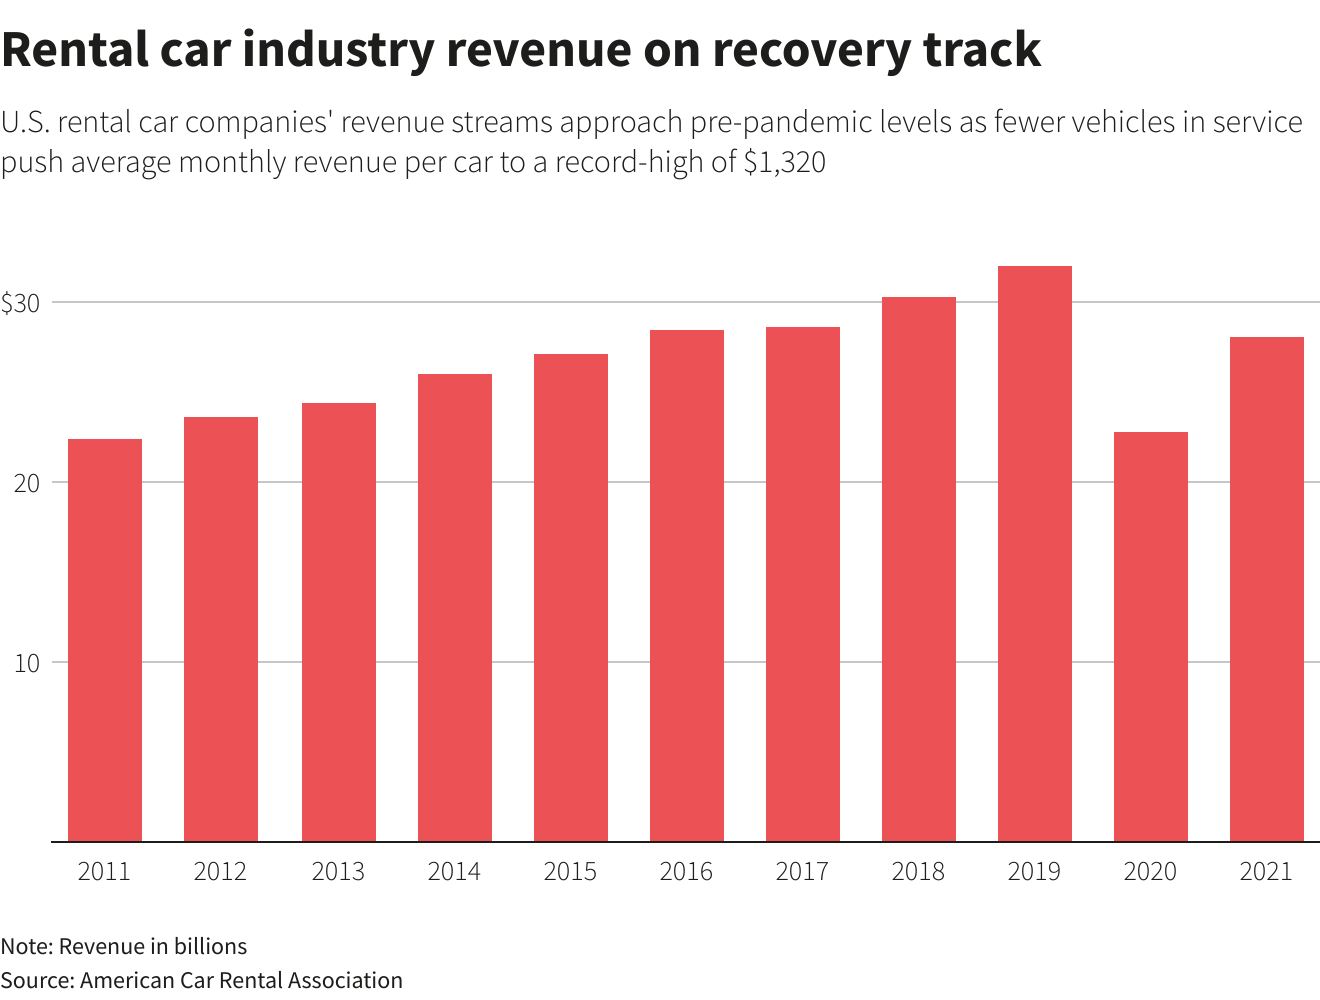 Rental car industry revenue on course for recovery